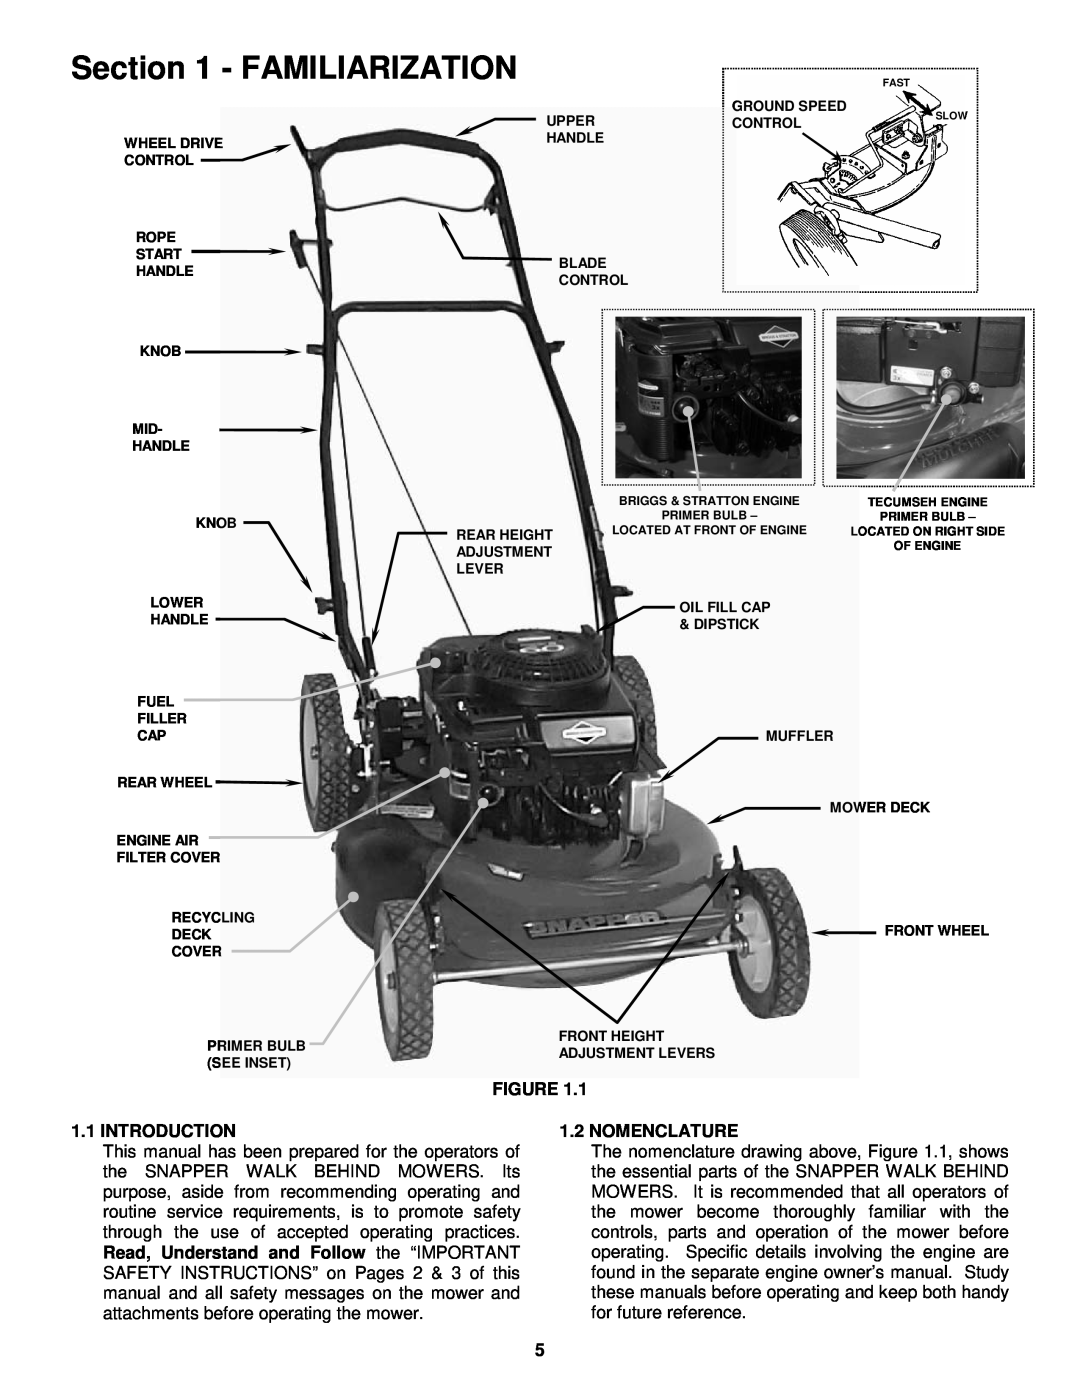 Snapper MRP216015B important safety instructions Familiarization, Introduction, Nomenclature 